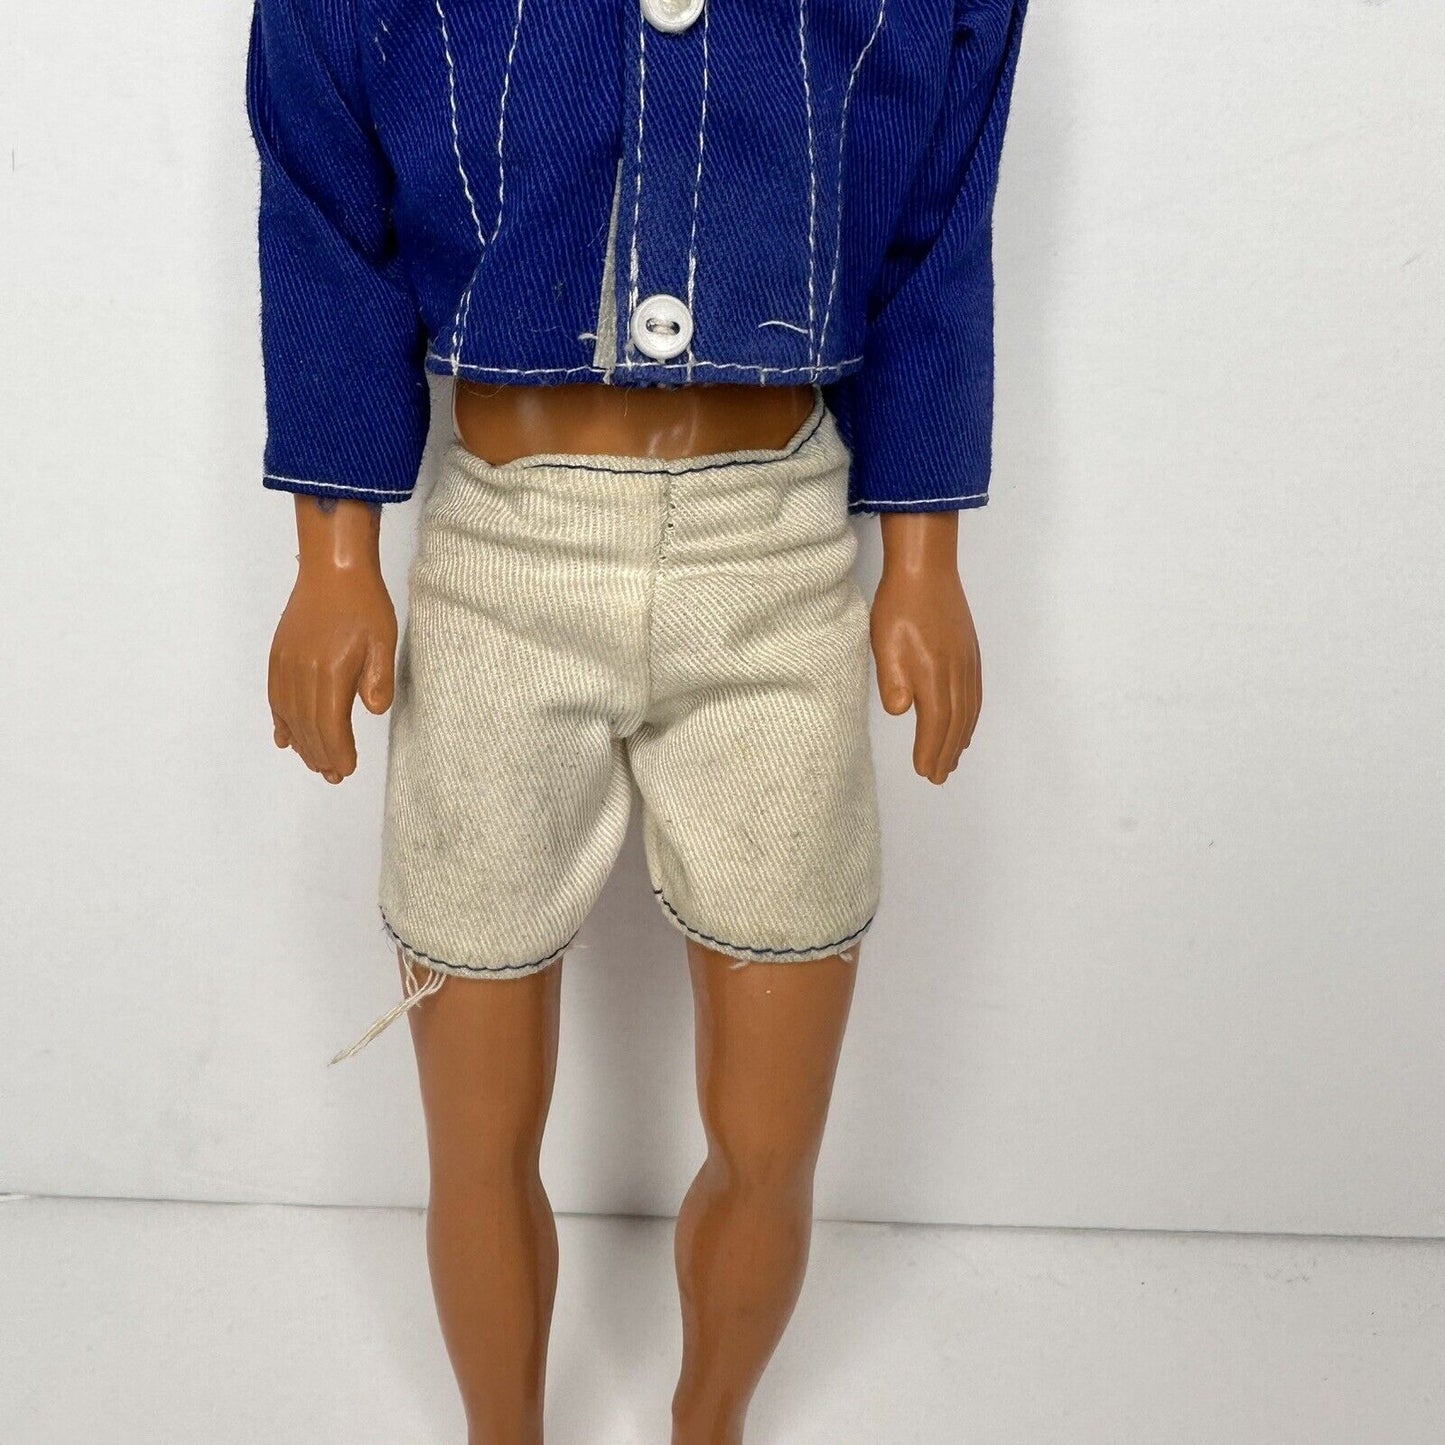 Vintage 1968 Malibu Ken Doll - 12" Collectible Toy with Molded Blonde Hair - TreasuTiques